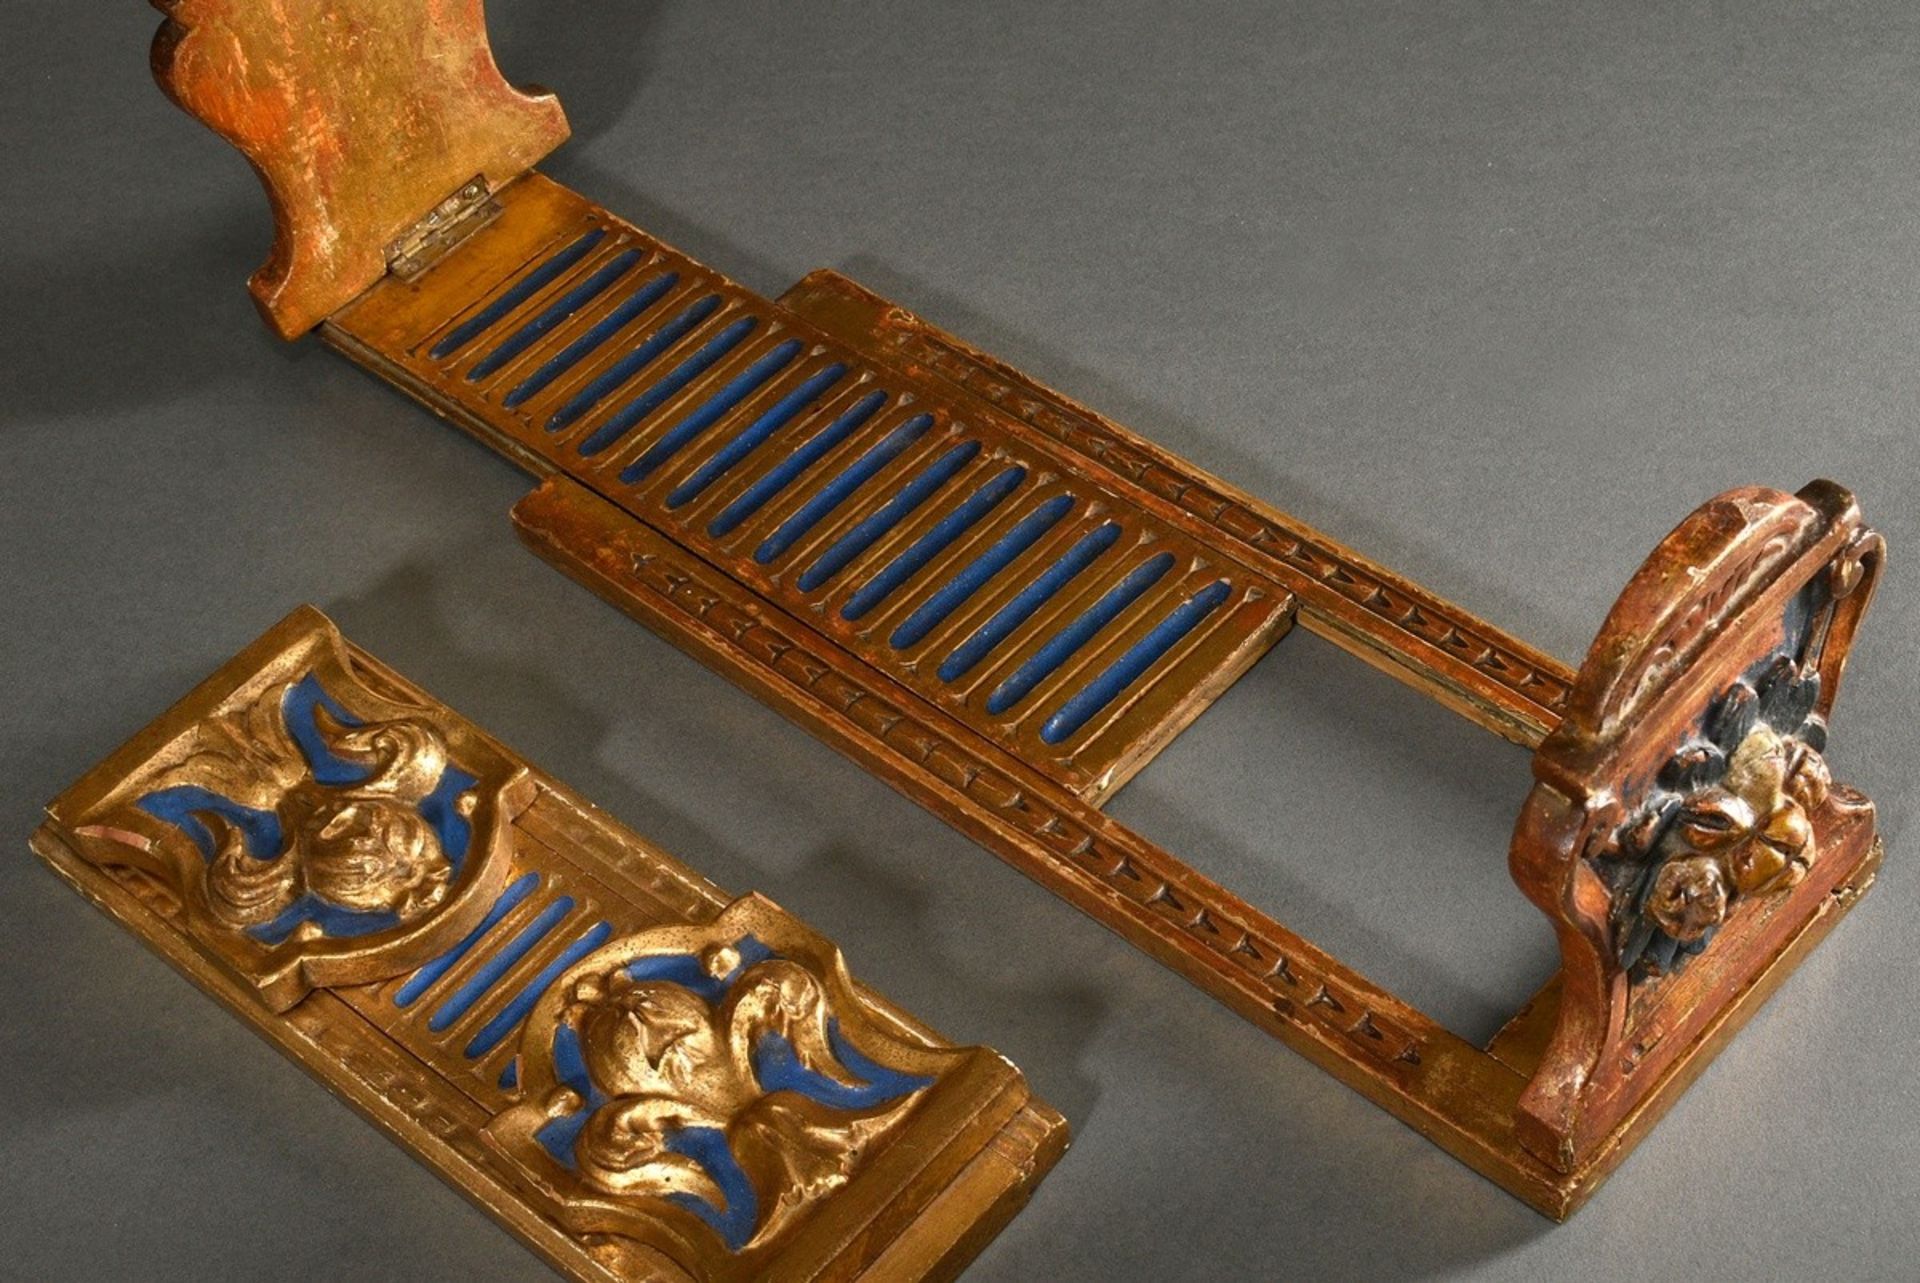 2 various size-adjustable bookends, carved wood, coloured and gilded, Italy early 20th century, 41. - Image 3 of 5